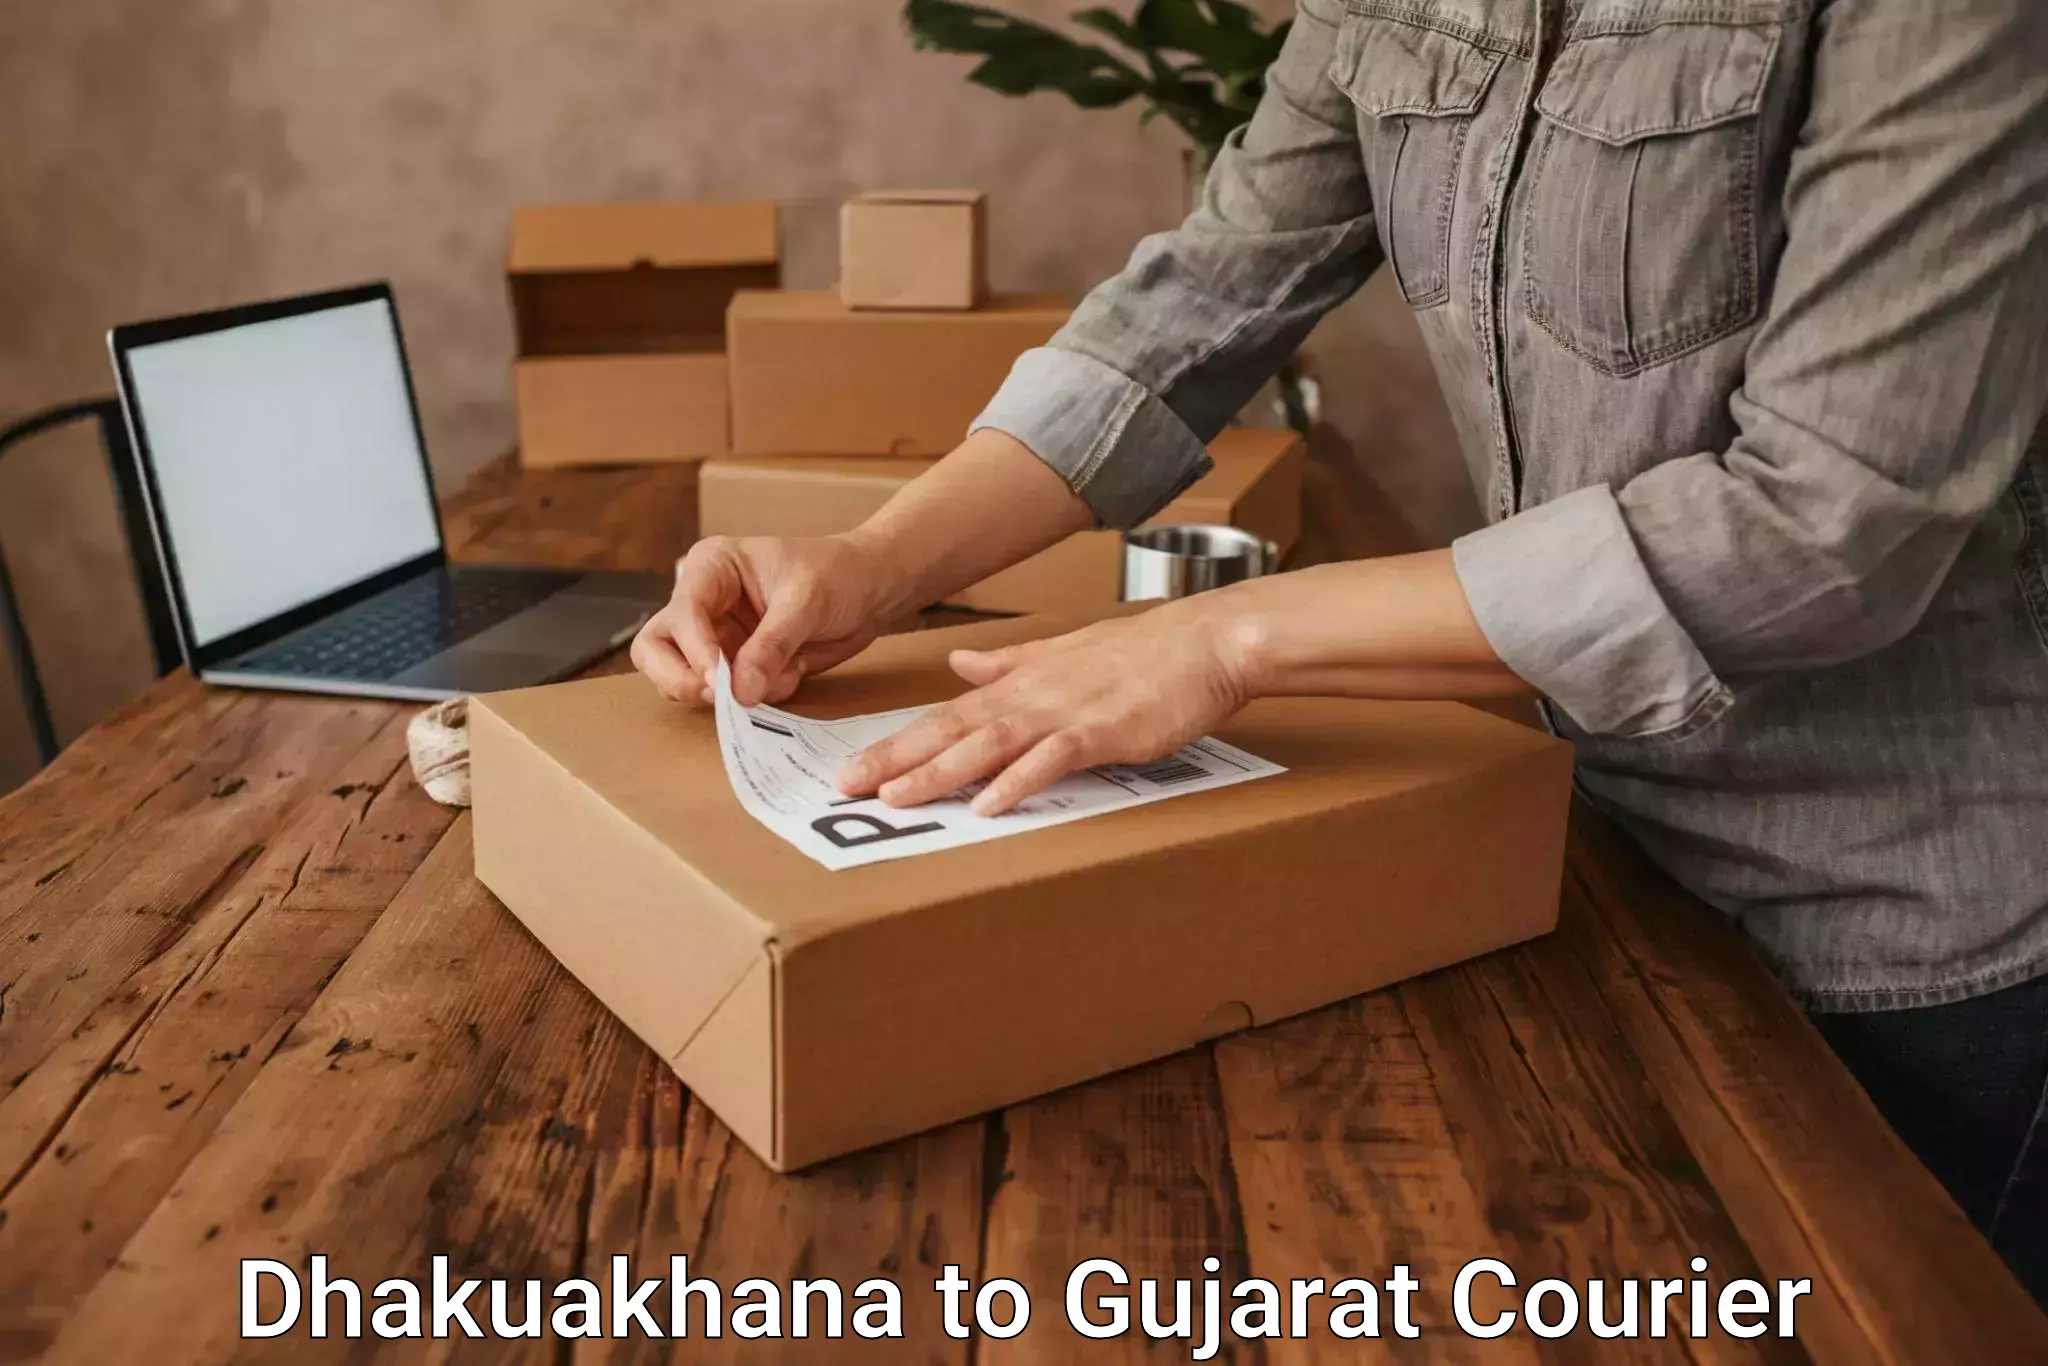 Local delivery service Dhakuakhana to Gujarat